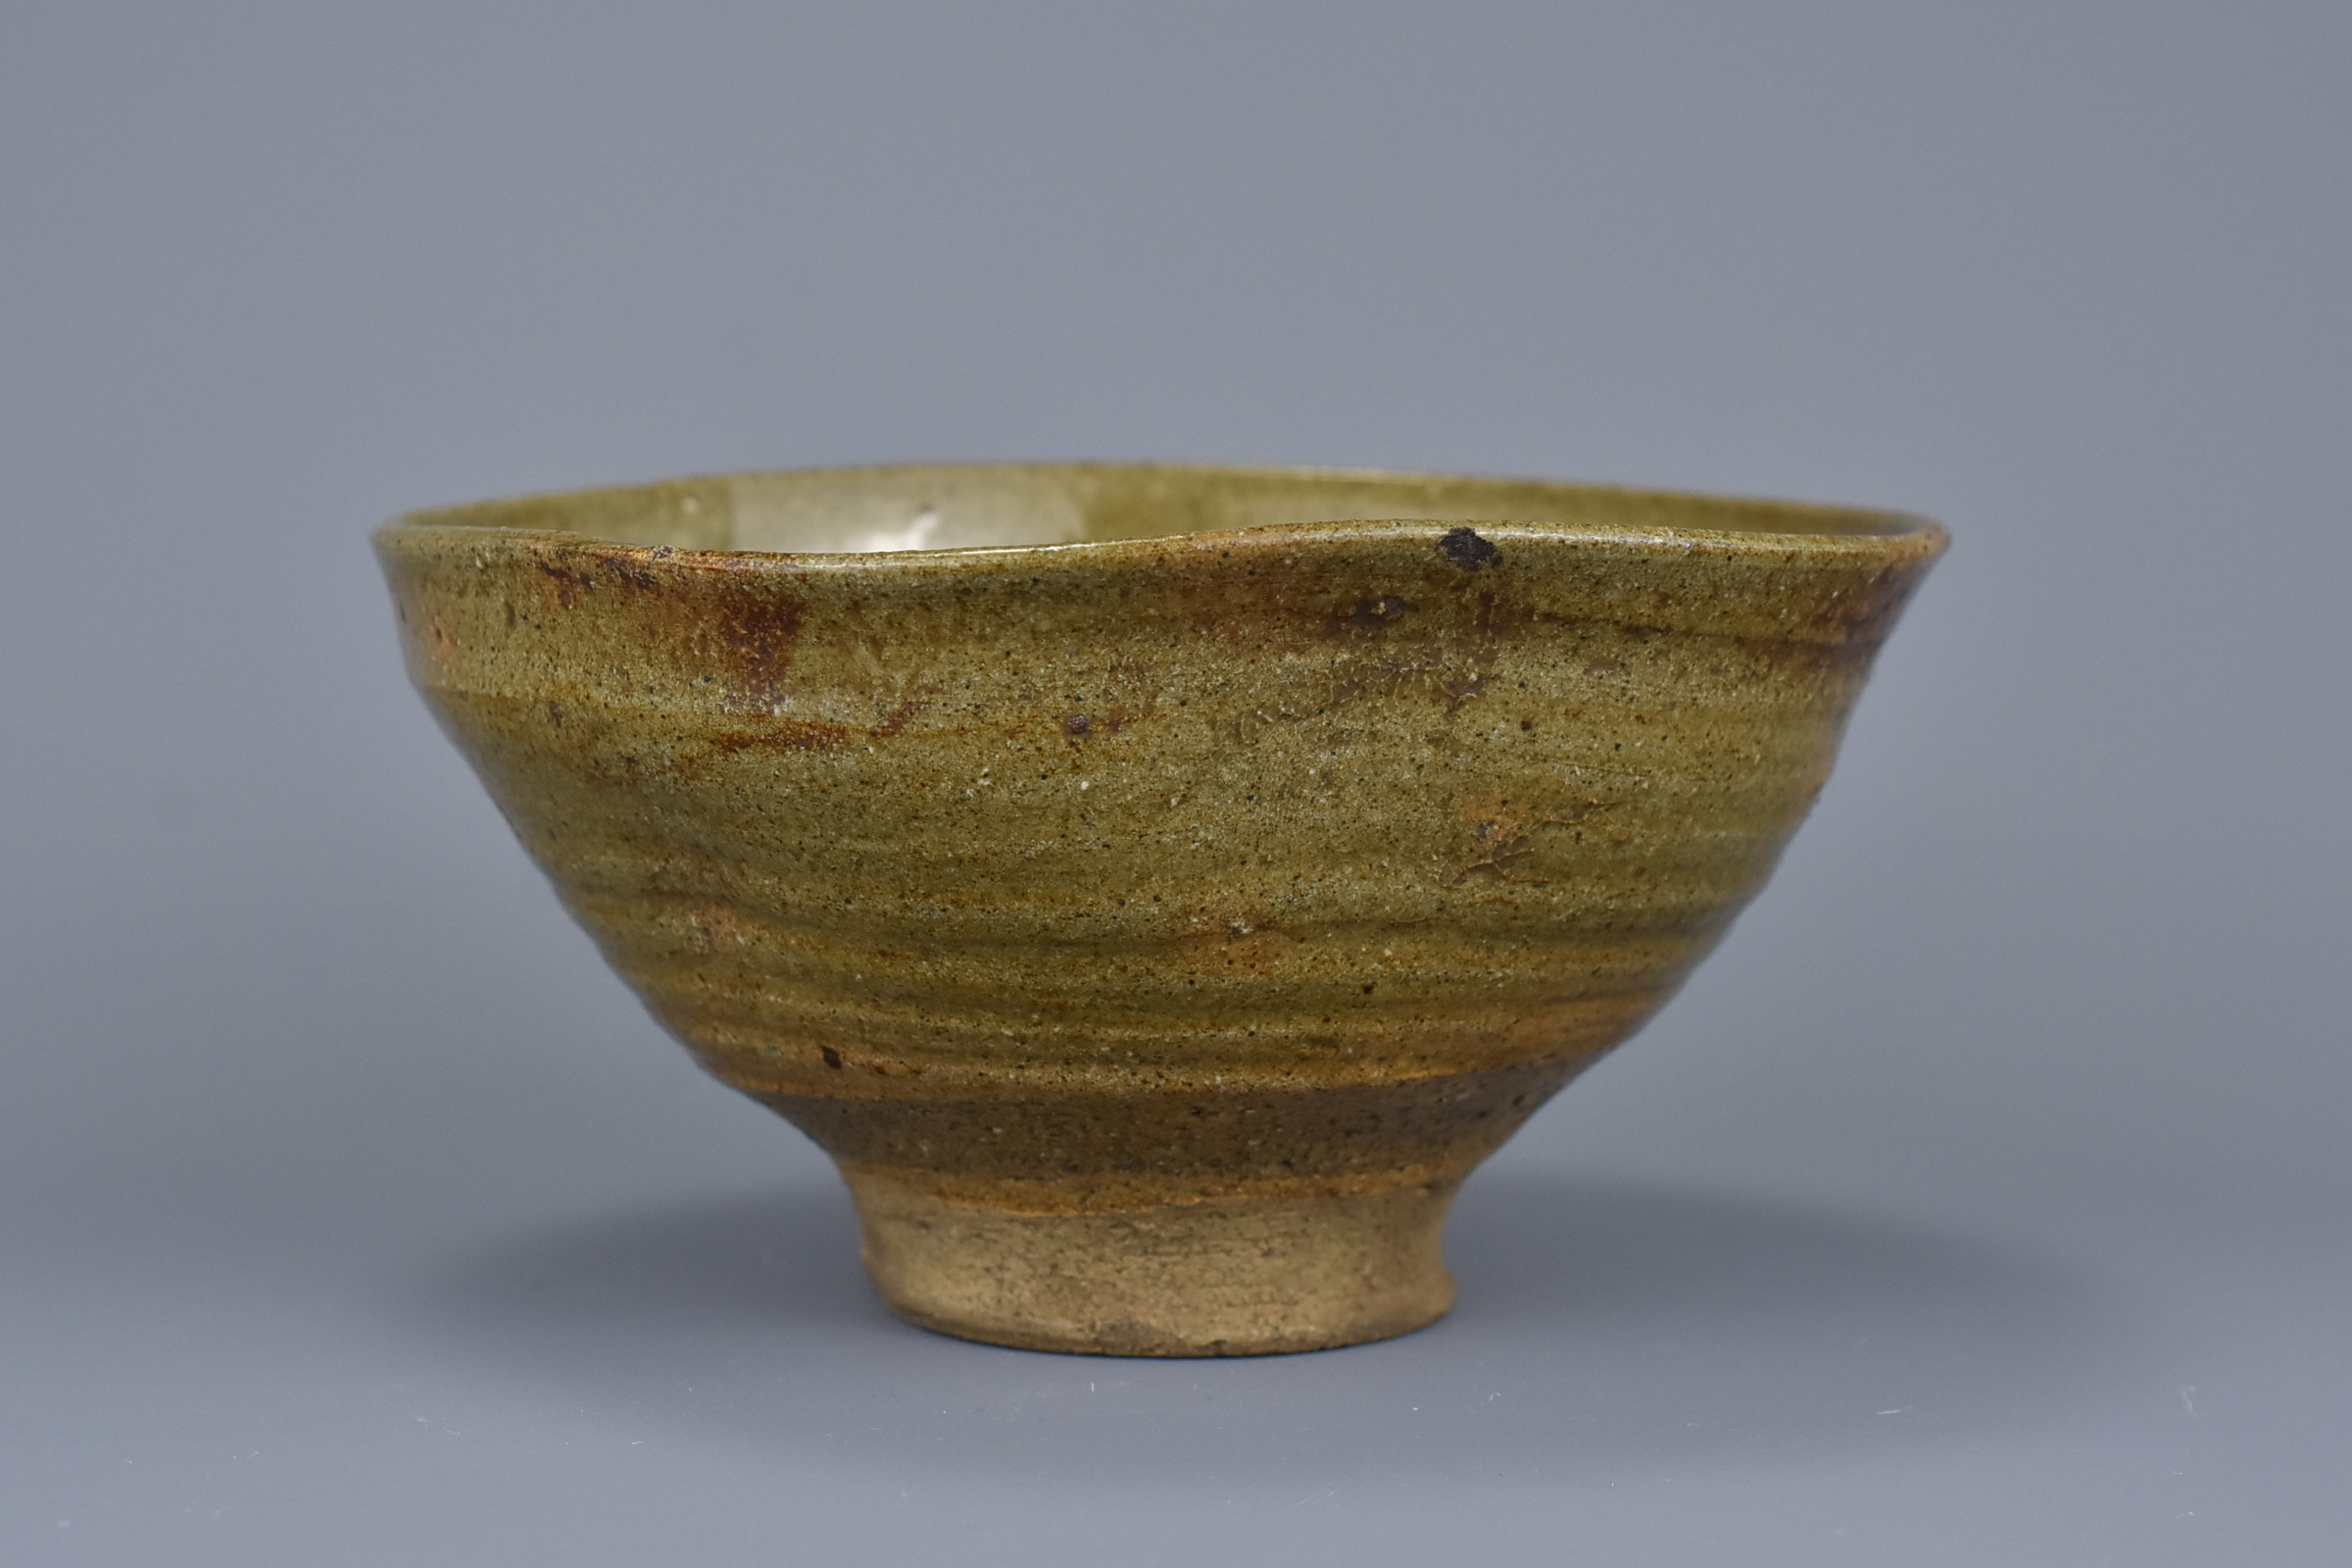 A Japanese or Korean Glazed Stoneware Bowl of Conical Form, 19th Century - Image 5 of 7